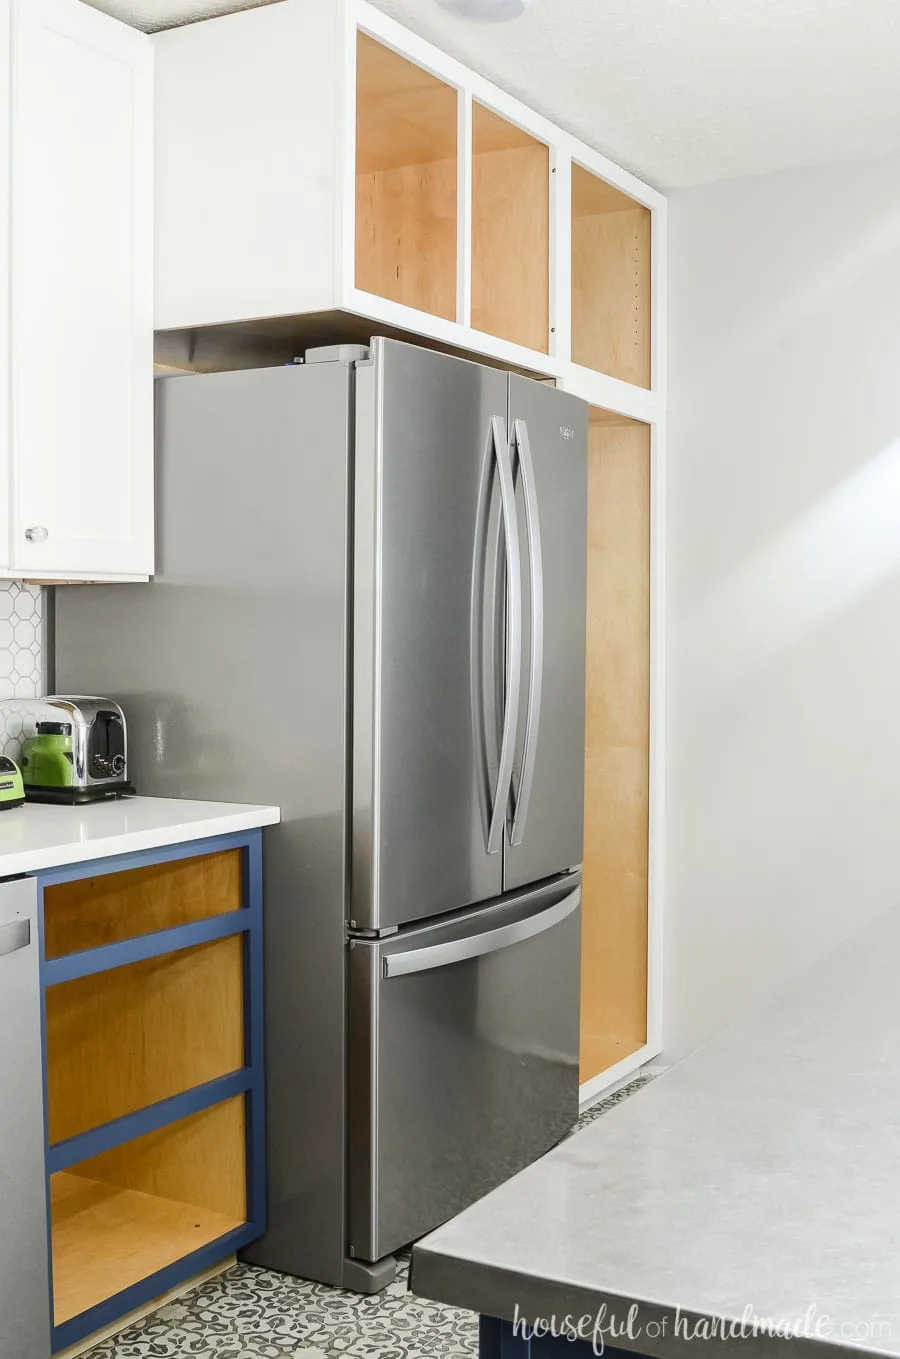 Stainless steel refrigerator surrounded by deep white cabinets for a pantry. Budget farmhouse kitchen reveal at Housefulofhandmade.com